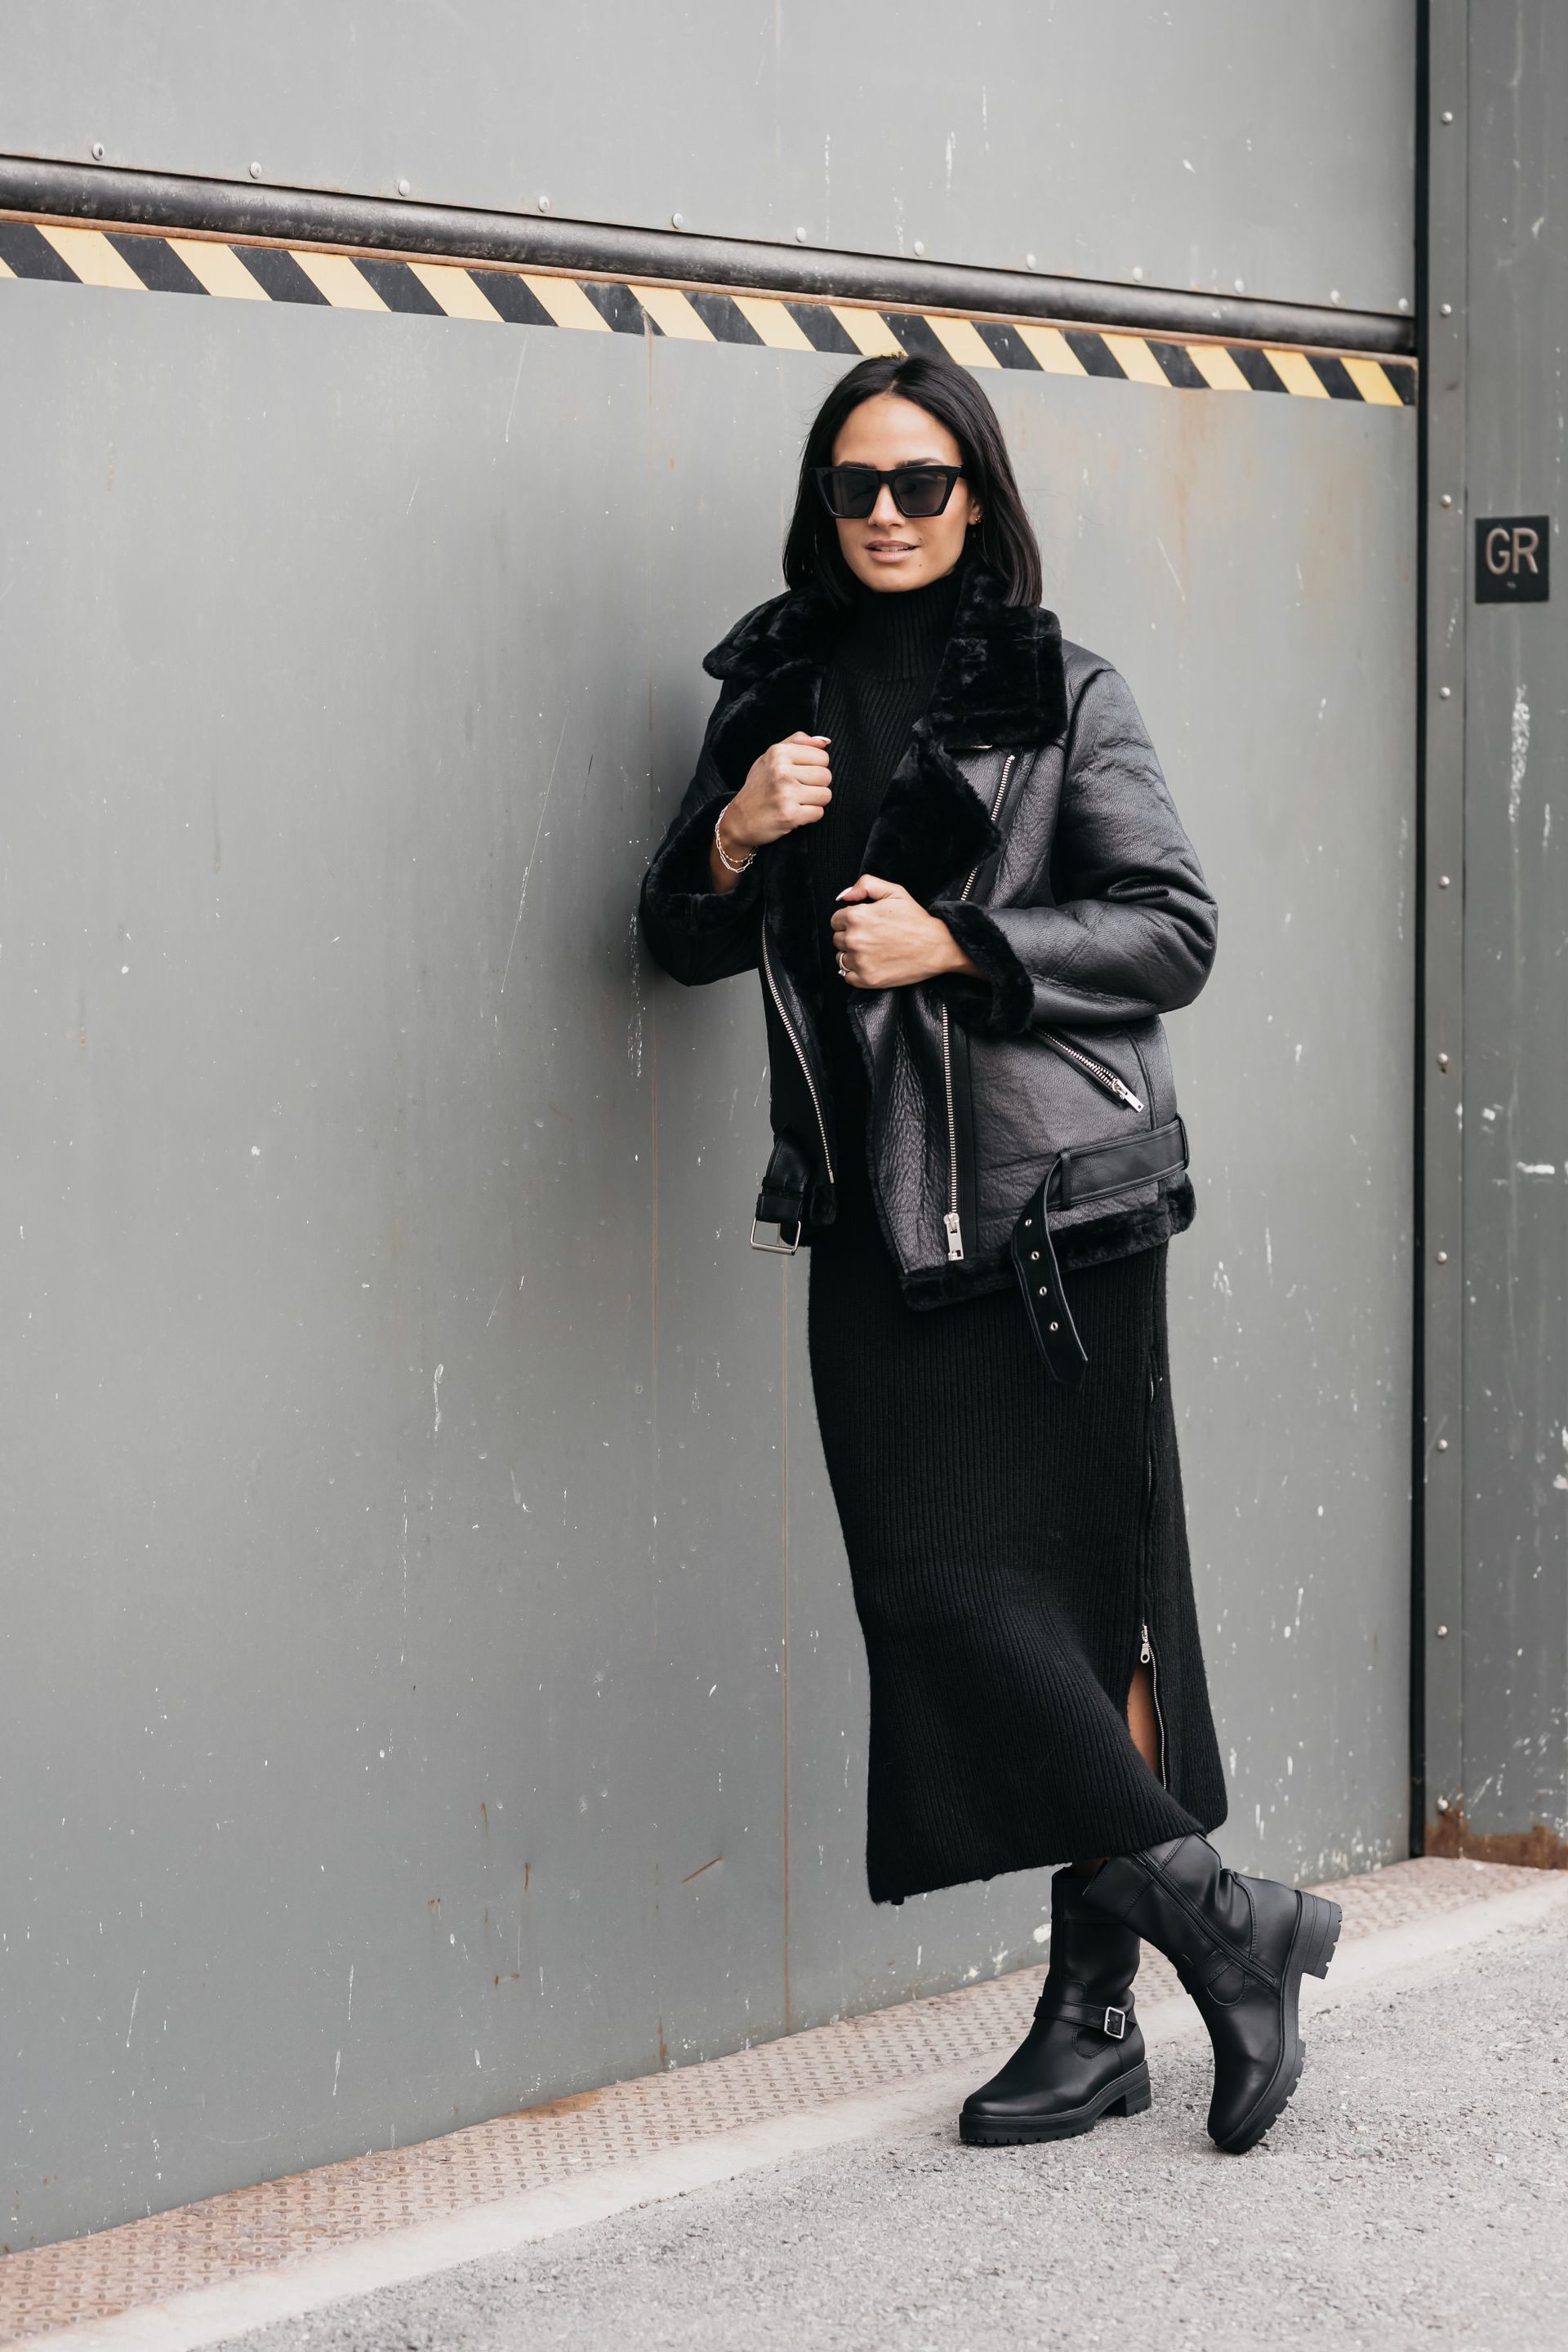 Woman in a long black skirt, motorcycle-style leather coat, ankle-high boots, and dark sunglasses, leaning confidently against a closed freight elevator door for her personal branding photos.